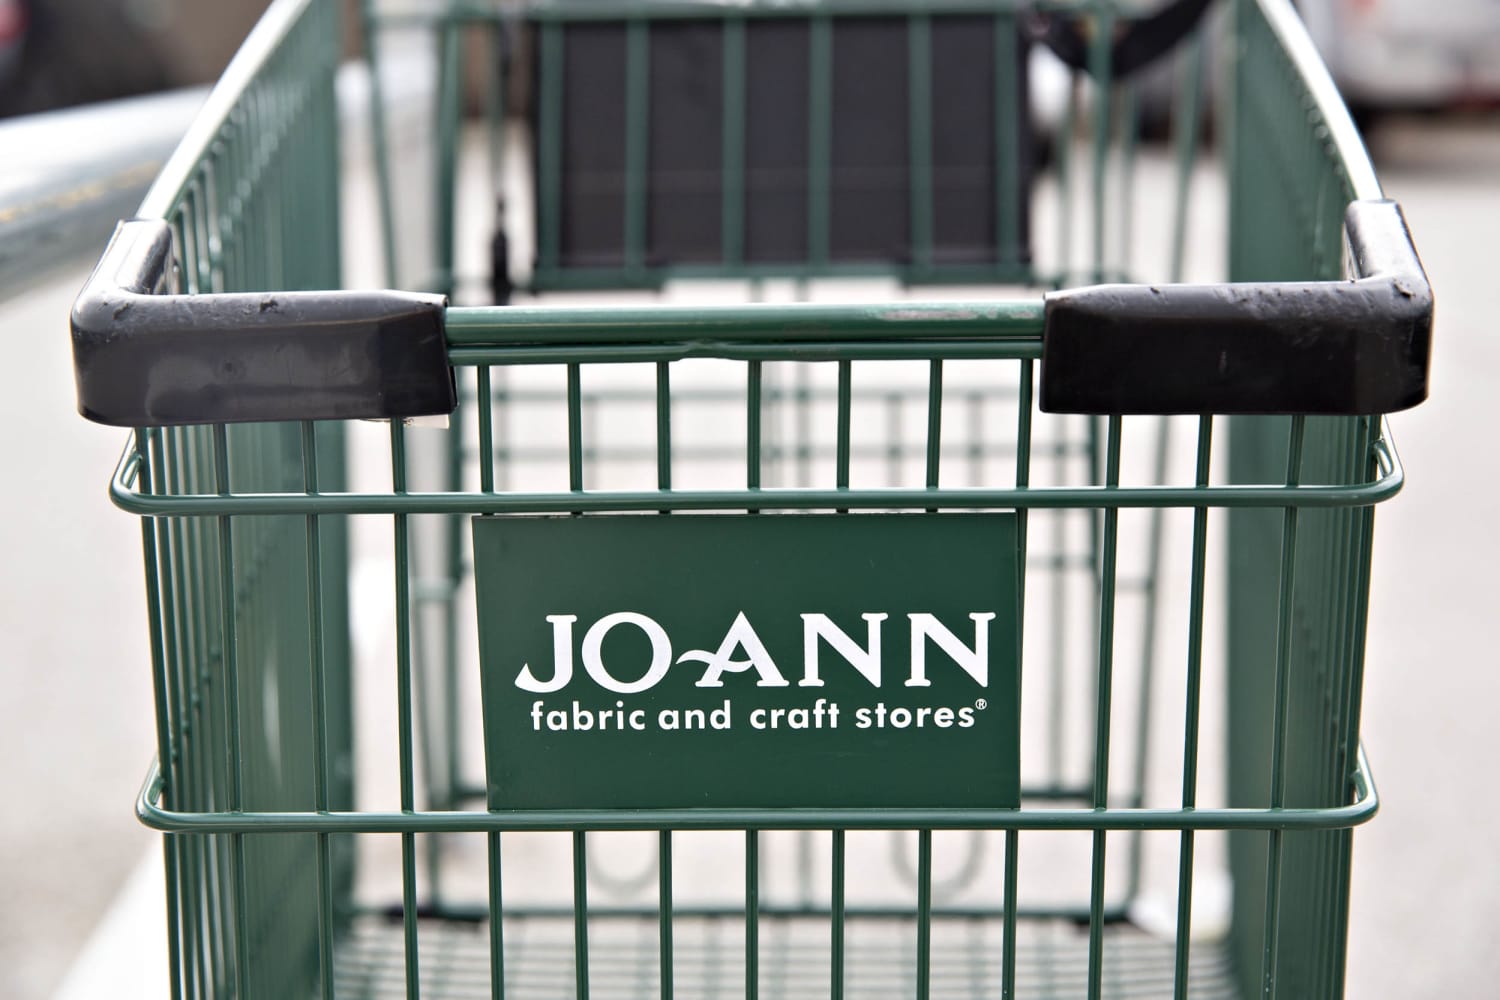 Joann Fabrics And Crafts Files For Bankruptcy Protection, Classic Hits  103.9 WLPO